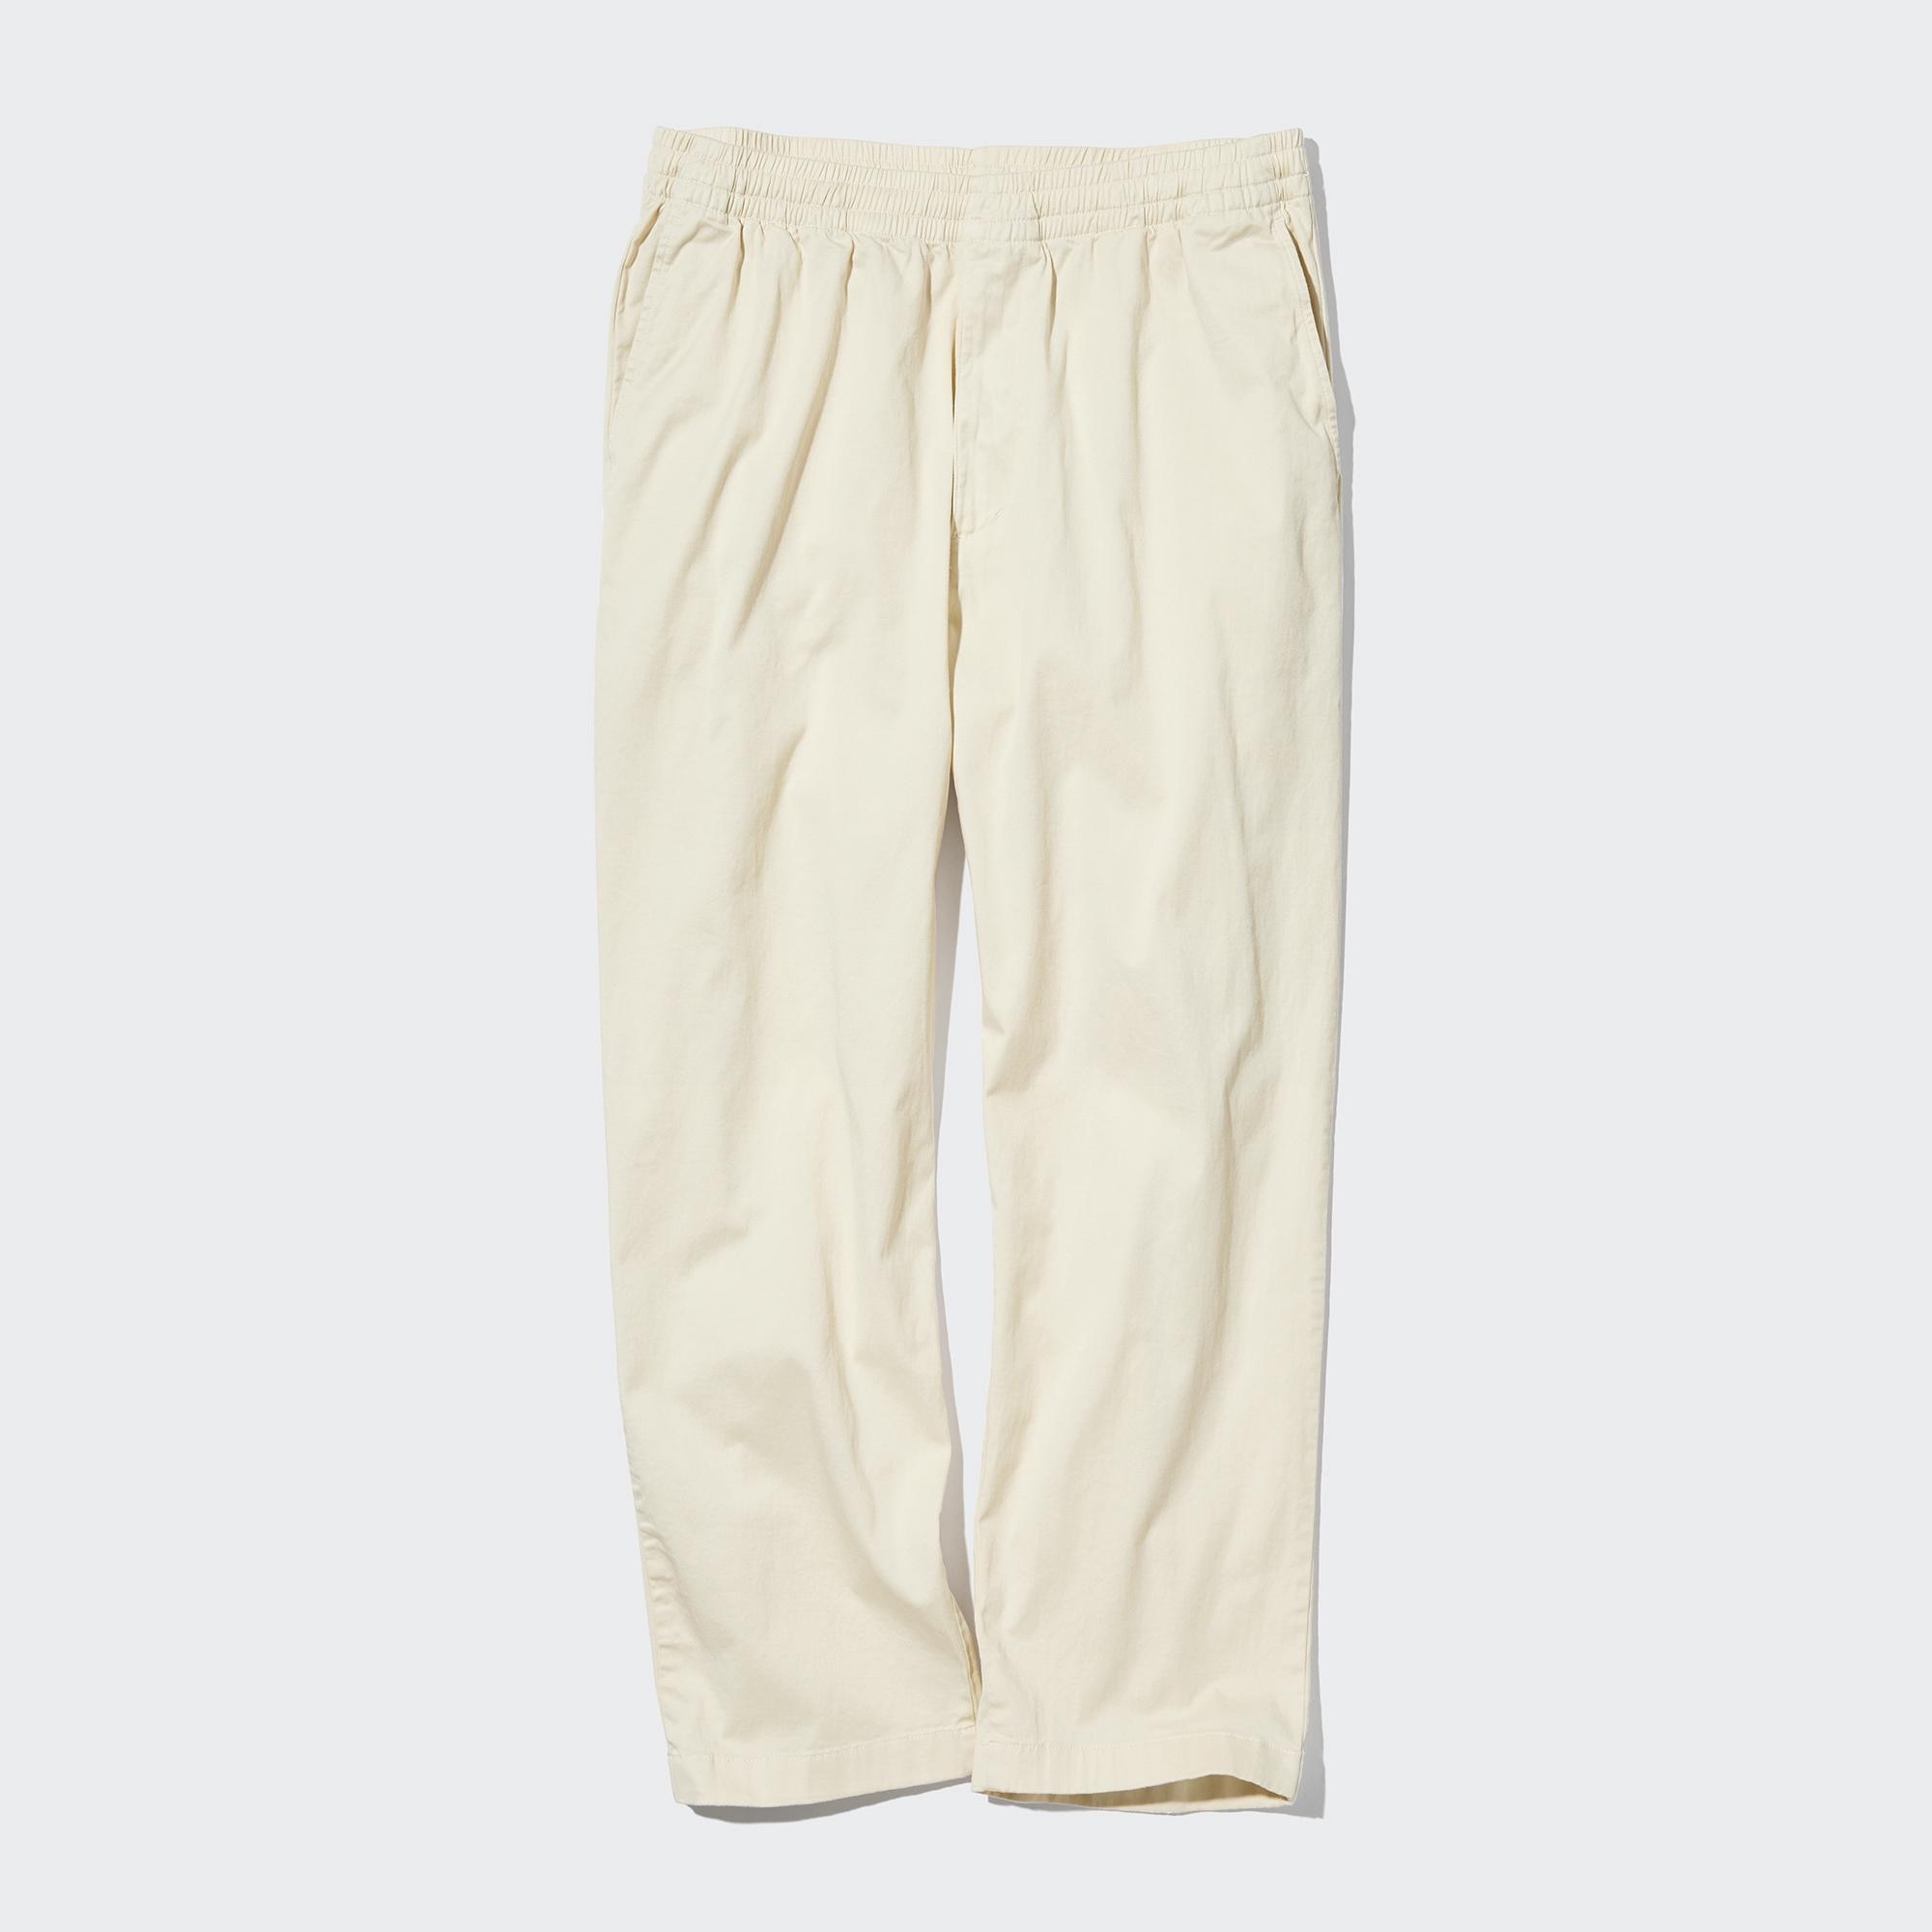 Introducing the ✨new version✨ Cotton Relax Ankle Pants – your go-to for  both indoor and outdoor comfort. Crafted from 100% cotton